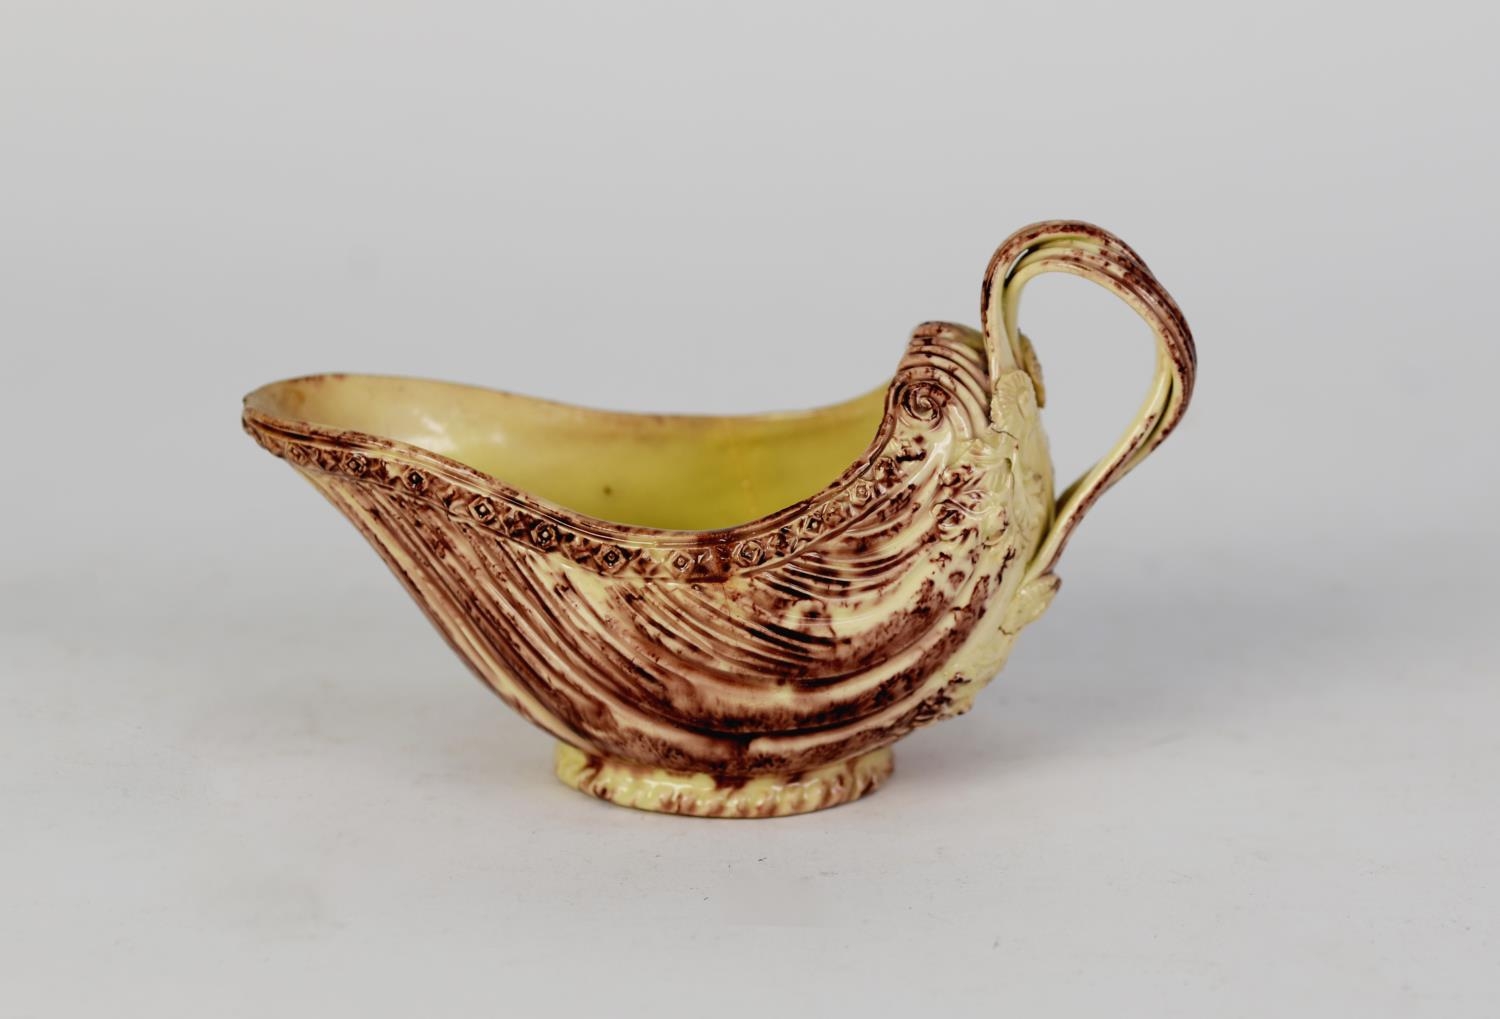 18th CENTURY WHIELDON POTTERY SHELL MOULDED SAUCE BOAT, with cream and brown glaze, diaper